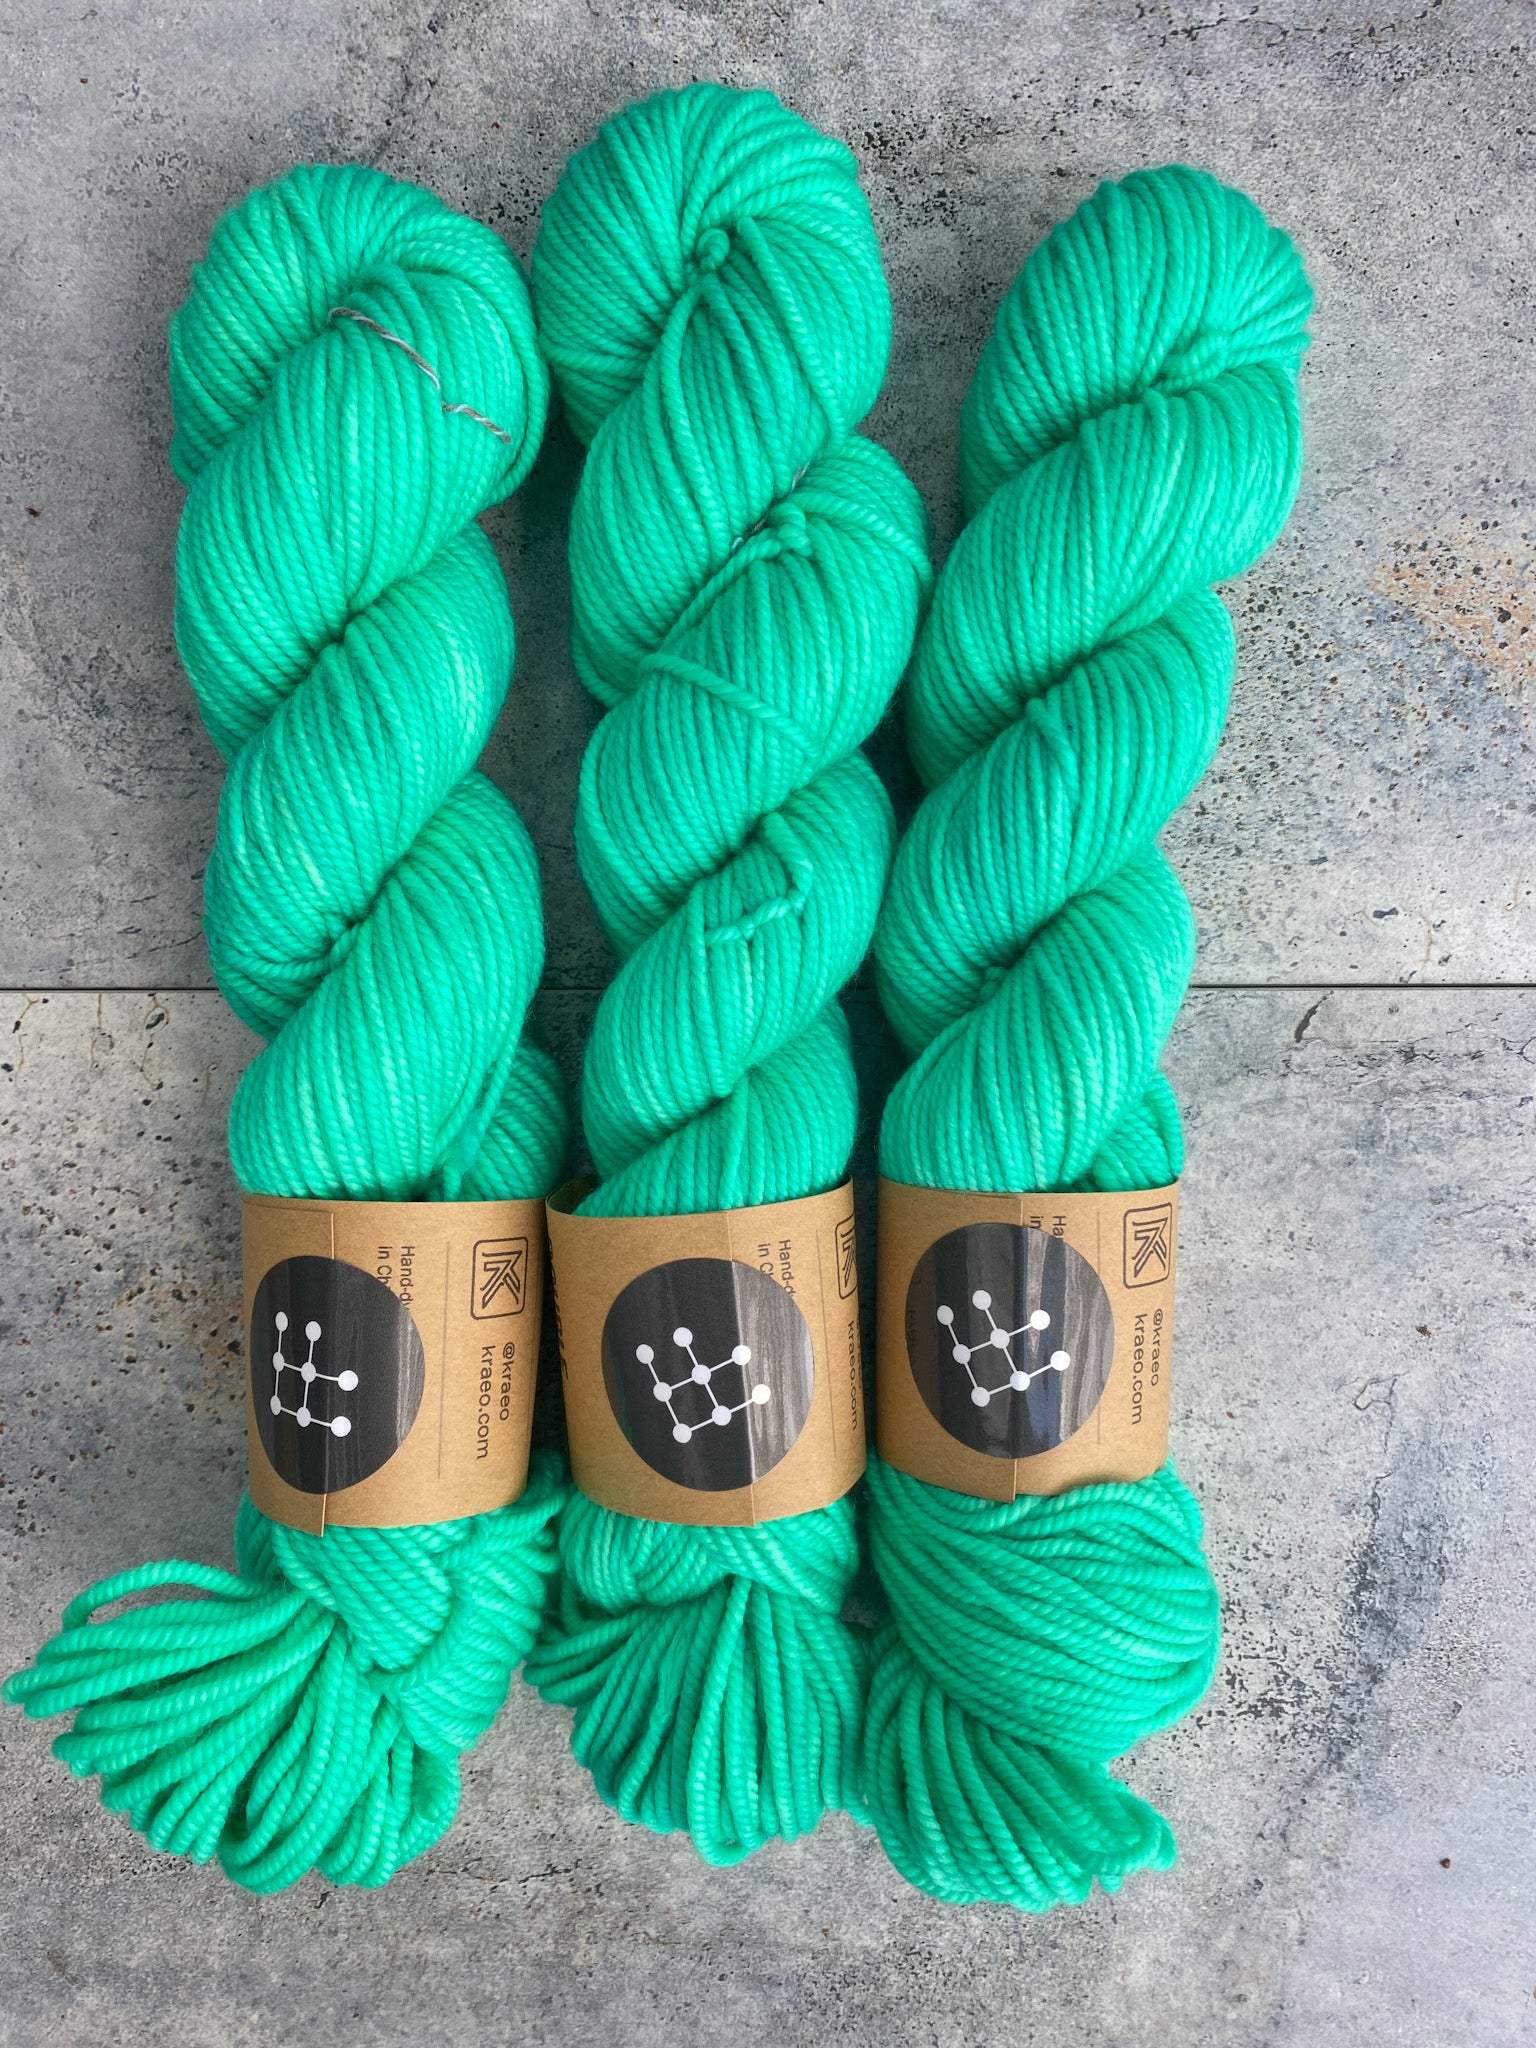 Double Mint on Big Brother (Aran)